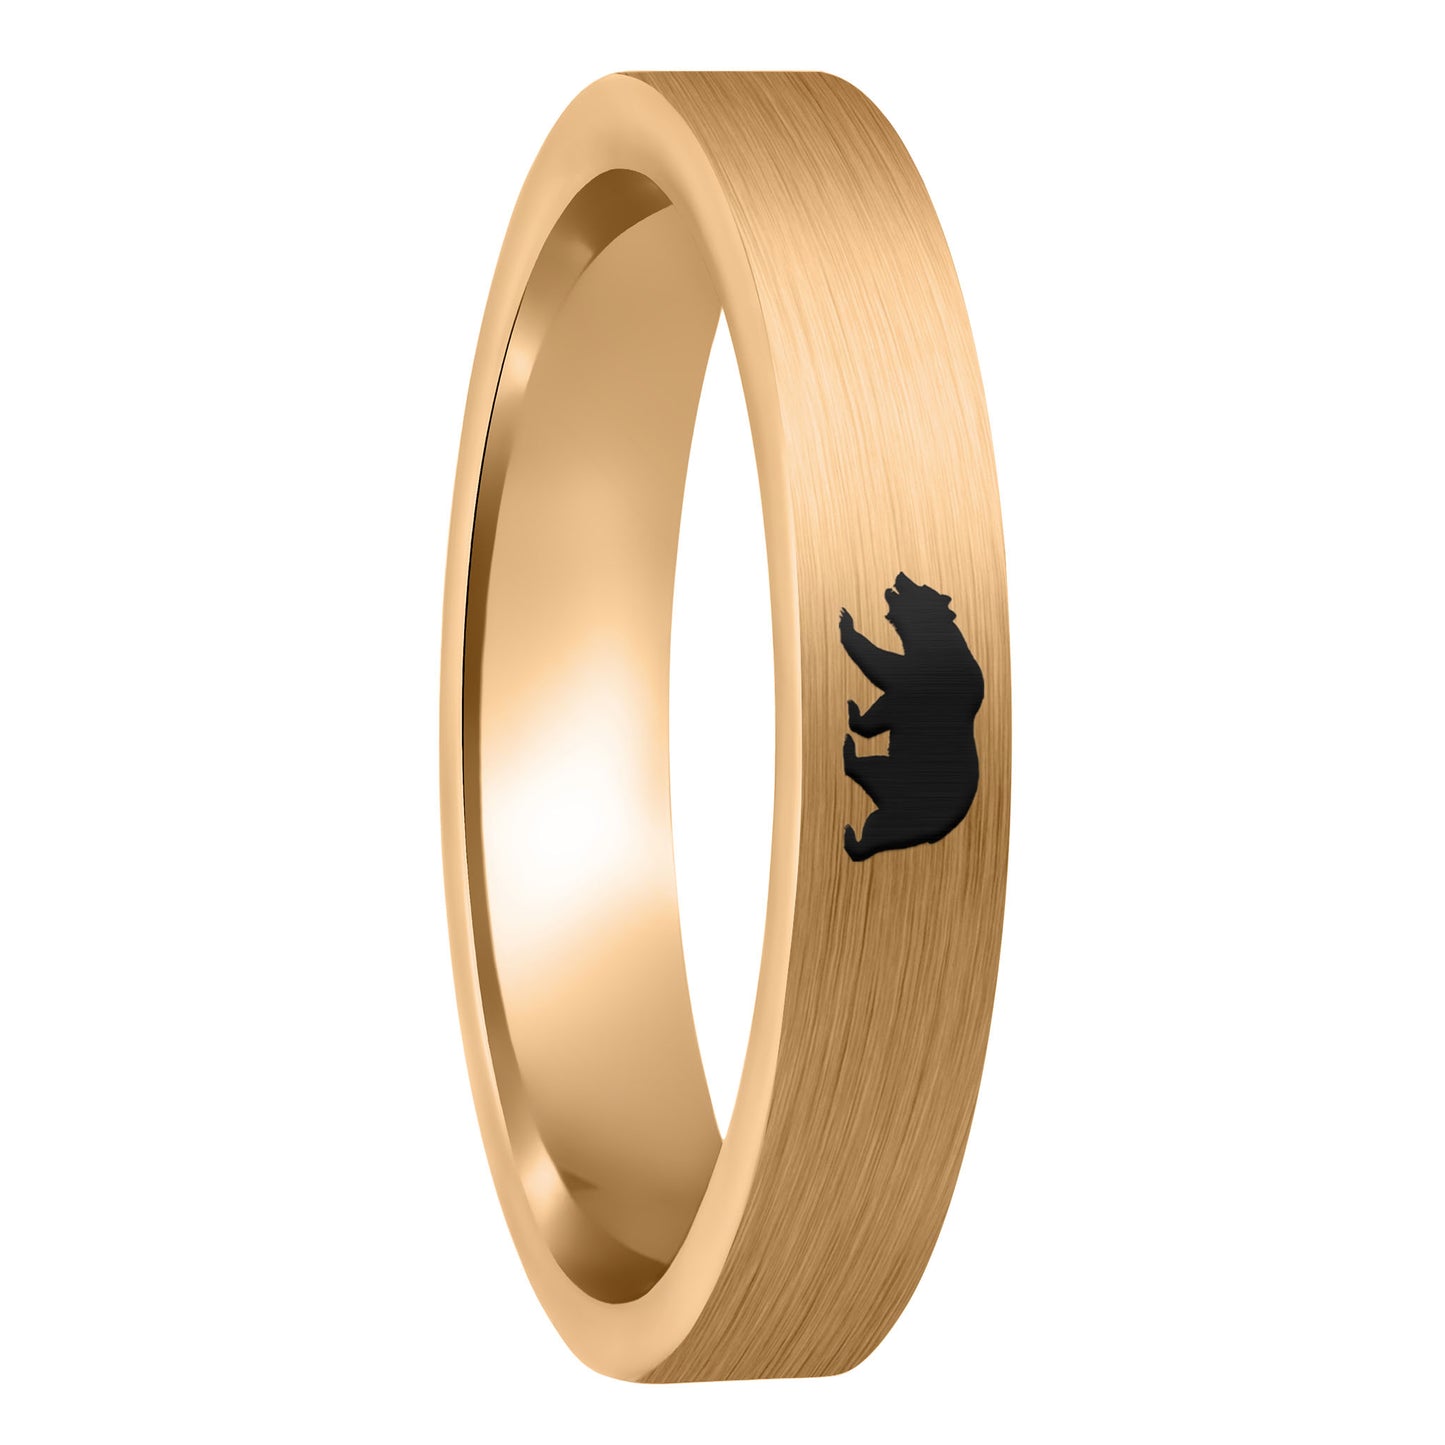 A bear brushed rose gold tungsten women's wedding band displayed on a plain white background.